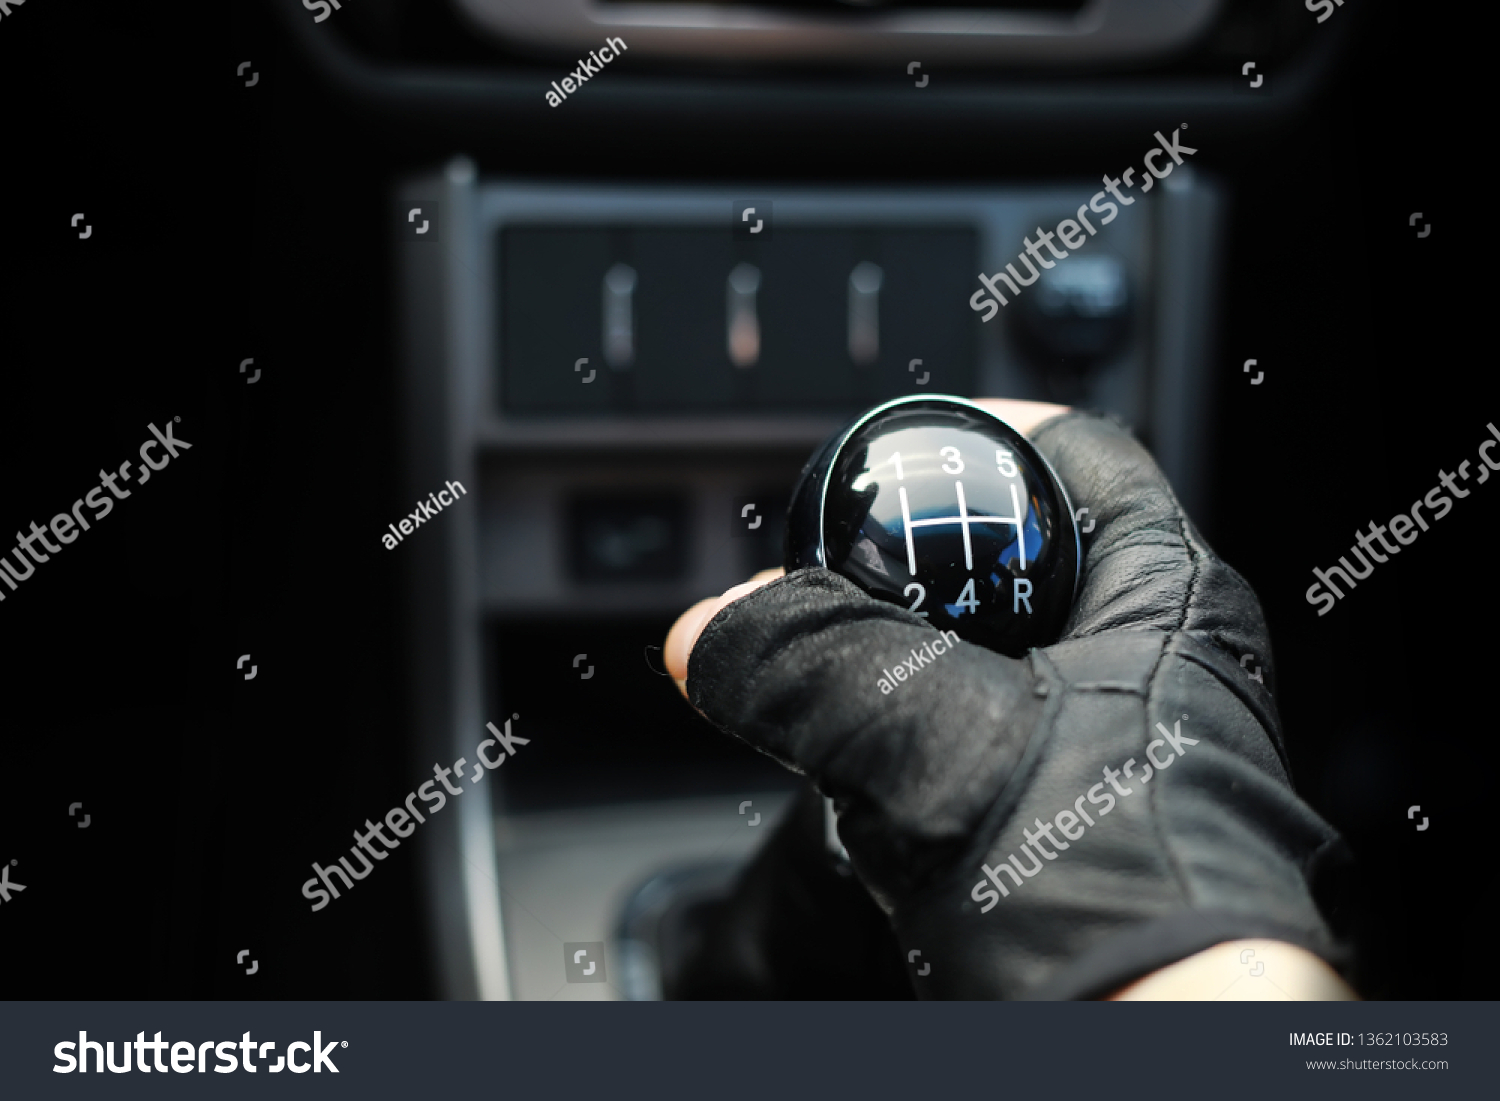 Gear lever. Manual Transmission. Hand on the gear shift in the car. #1362103583